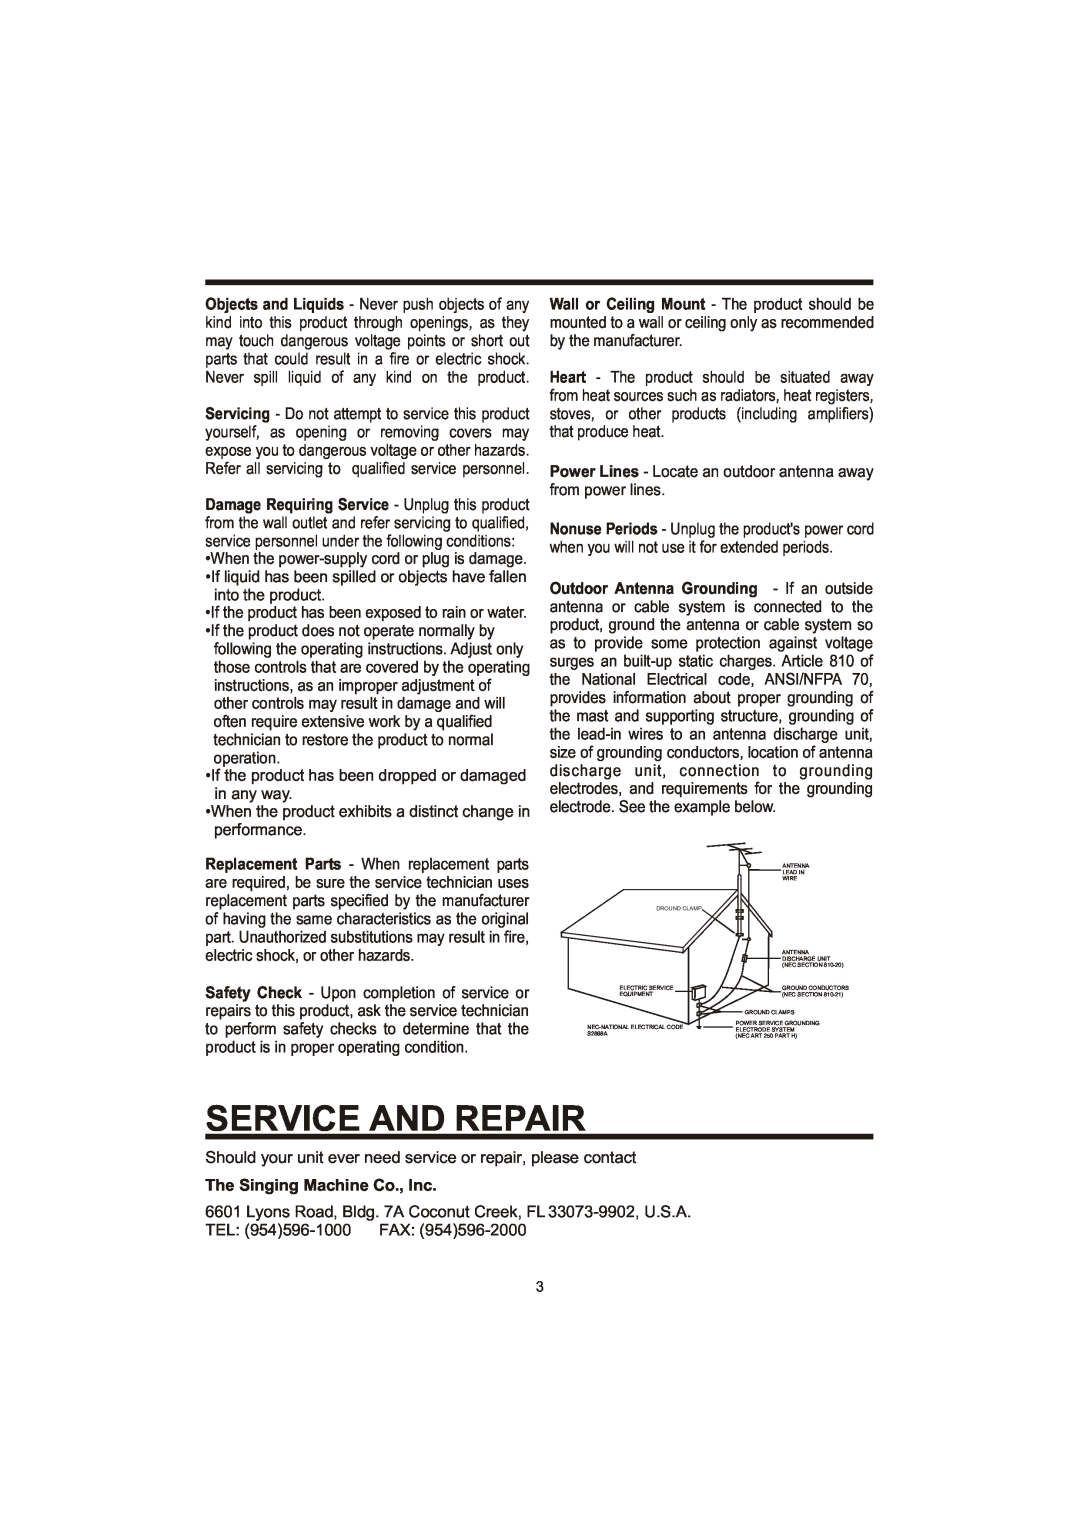 The Singing Machine SME-378 owner manual Service And Repair, The Singing Machine Co., Inc 